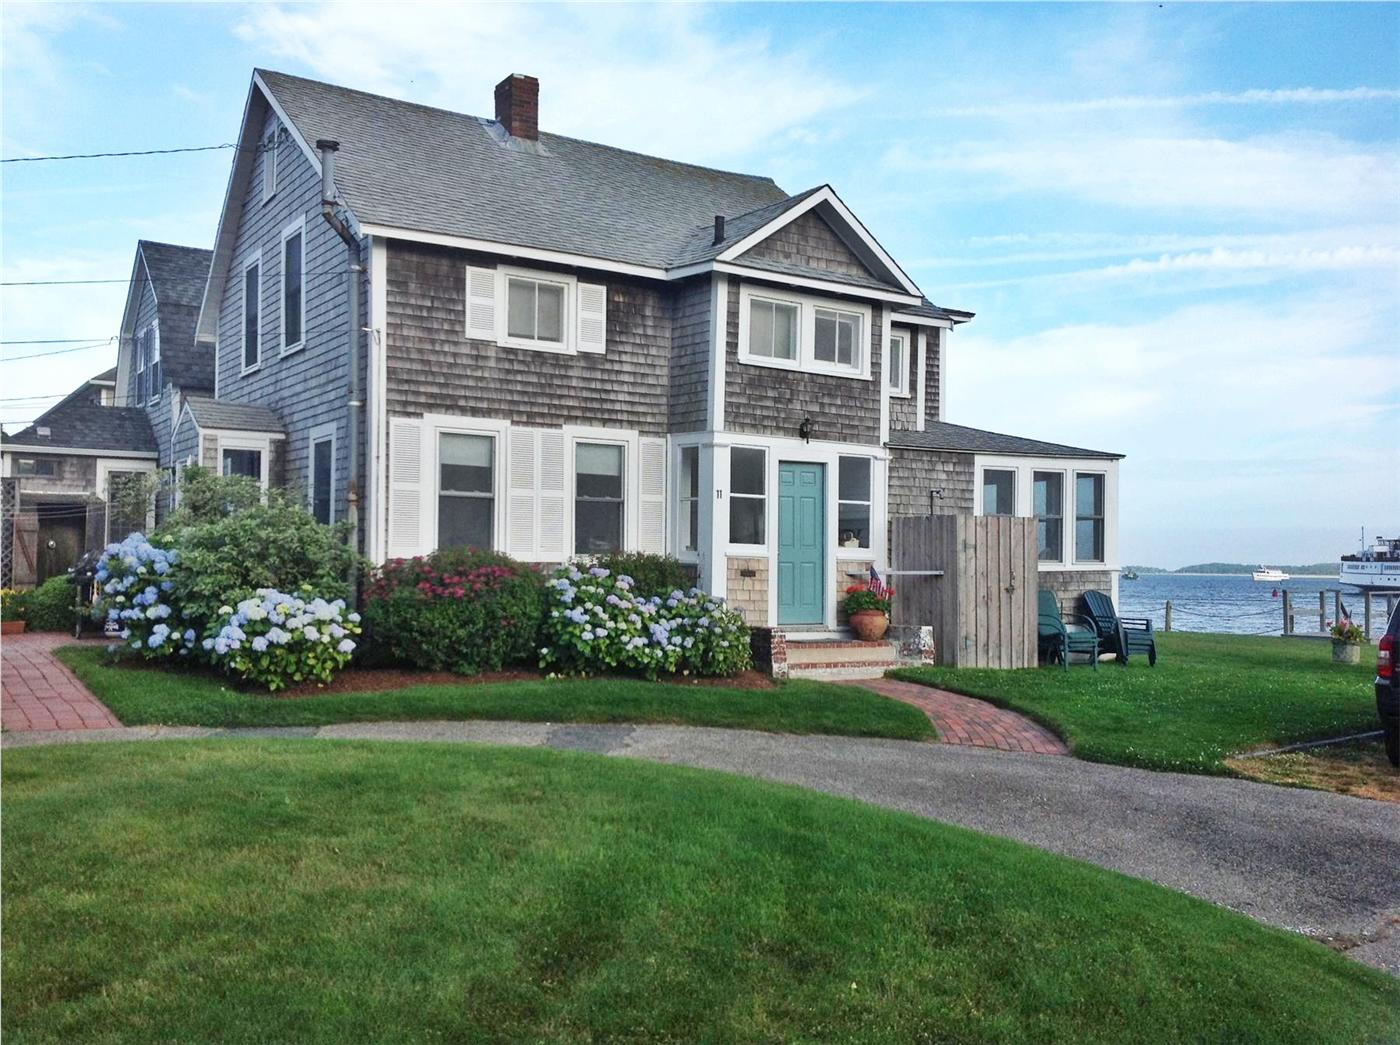 Looking For Perfect Summer Rental; We've Got Covered - CapeCod.com